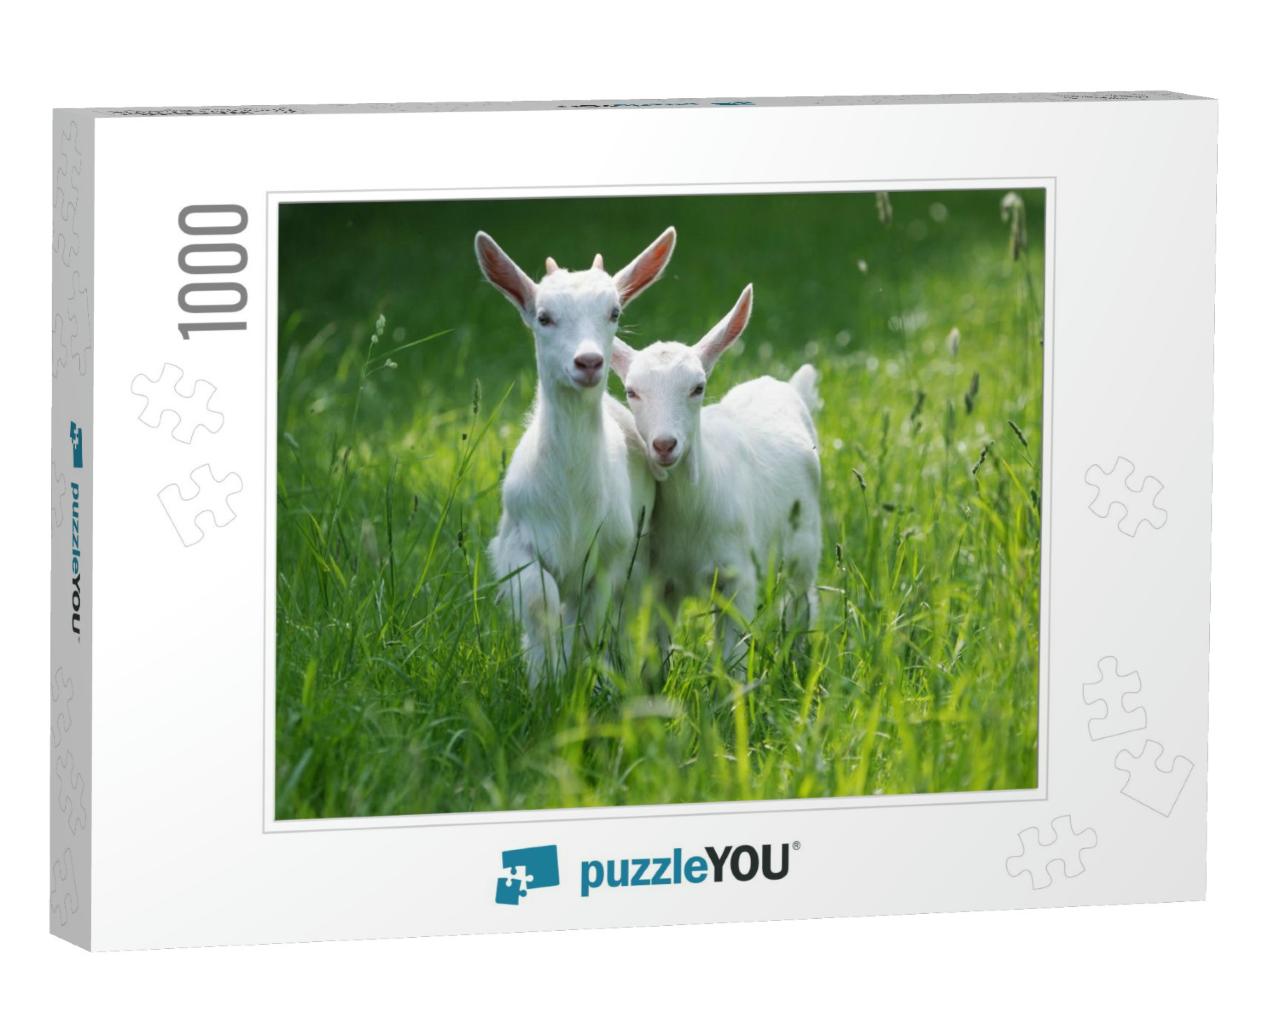 Two Baby Goat Kids Stand in Long Summer Grass... Jigsaw Puzzle with 1000 pieces